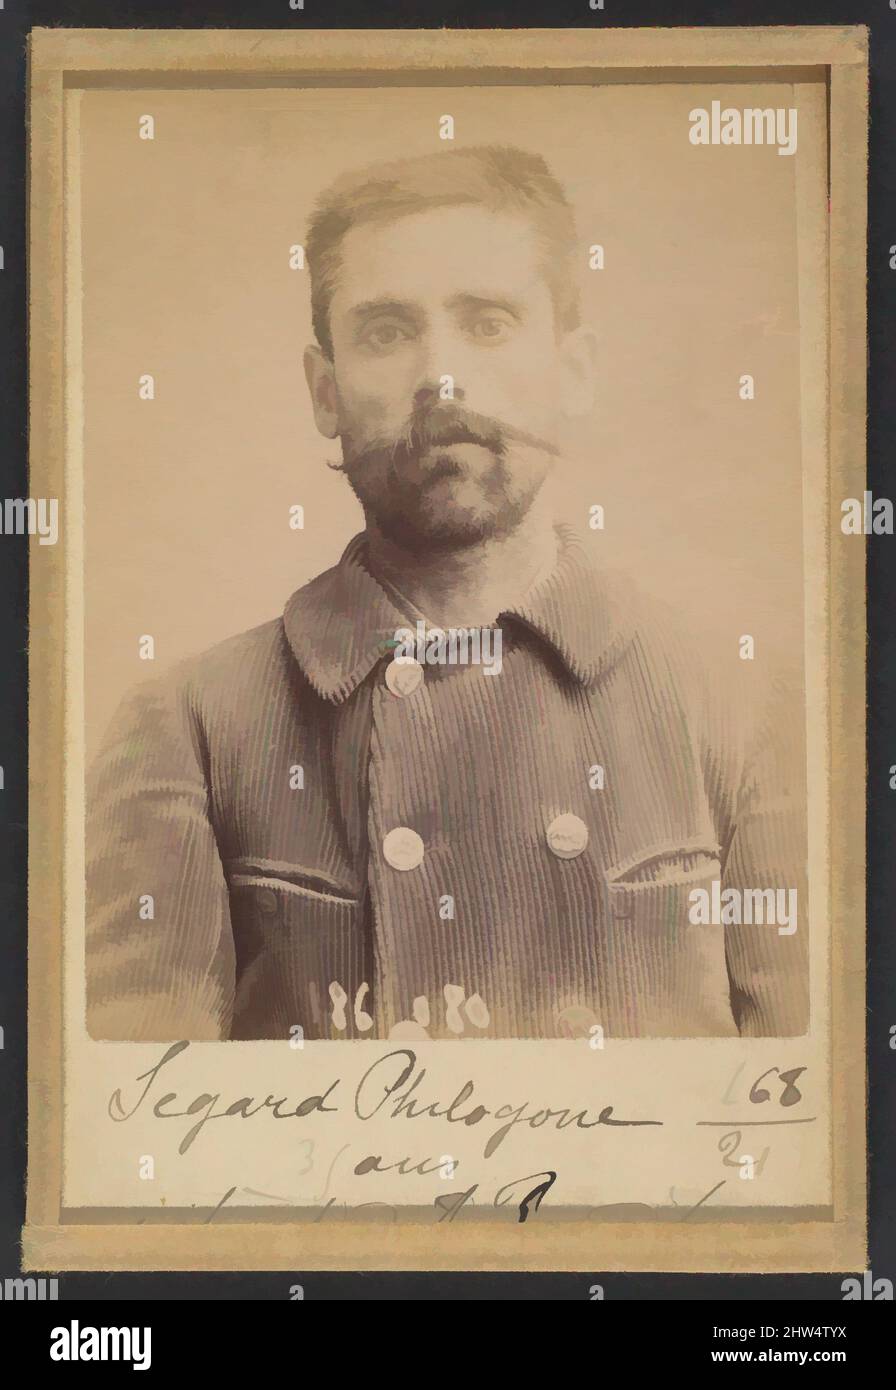 Art inspired by Segard. Philogone. 44 ans (35 ans inscrit sur la photo), né à Salond (Somme). Journaliste. Anarchiste., 1891–95, Albumen silver print from glass negative, 10.5 x 7 x 0.5 cm (4 1/8 x 2 3/4 x 3/16 in.) each, Photographs, Alphonse Bertillon (French, 1853–1914), Born into a, Classic works modernized by Artotop with a splash of modernity. Shapes, color and value, eye-catching visual impact on art. Emotions through freedom of artworks in a contemporary way. A timeless message pursuing a wildly creative new direction. Artists turning to the digital medium and creating the Artotop NFT Stock Photo